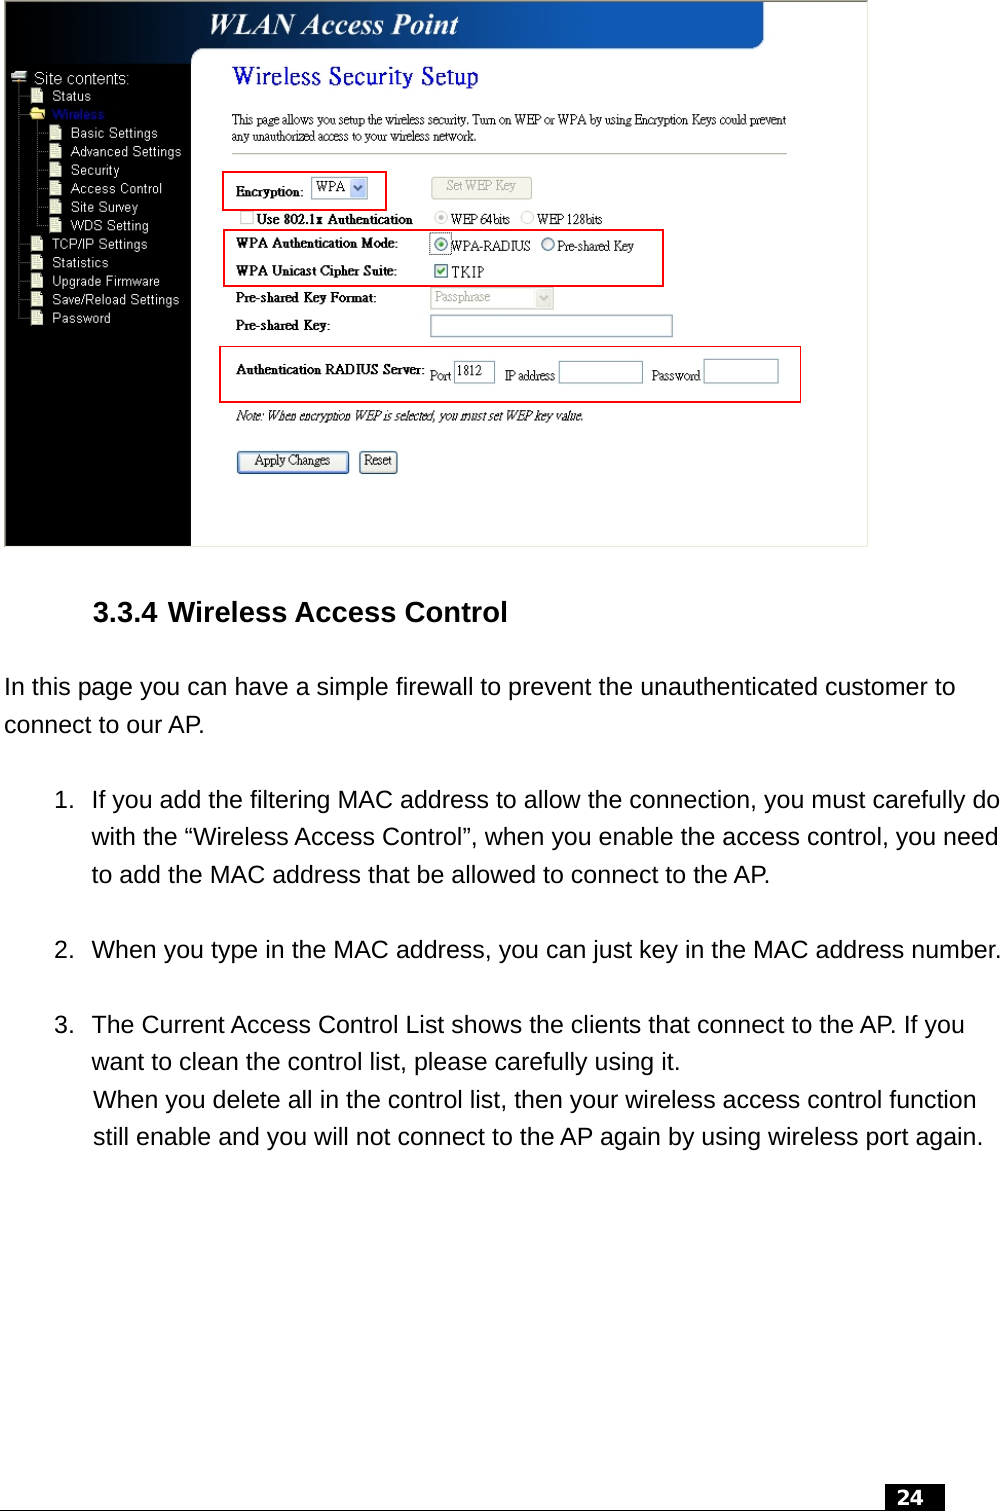  3.3.4 Wireless Access Control In this page you can have a simple firewall to prevent the unauthenticated customer to connect to our AP.  1.  If you add the filtering MAC address to allow the connection, you must carefully do with the “Wireless Access Control”, when you enable the access control, you need to add the MAC address that be allowed to connect to the AP.  2.  When you type in the MAC address, you can just key in the MAC address number.  3.  The Current Access Control List shows the clients that connect to the AP. If you want to clean the control list, please carefully using it. When you delete all in the control list, then your wireless access control function still enable and you will not connect to the AP again by using wireless port again.    24  